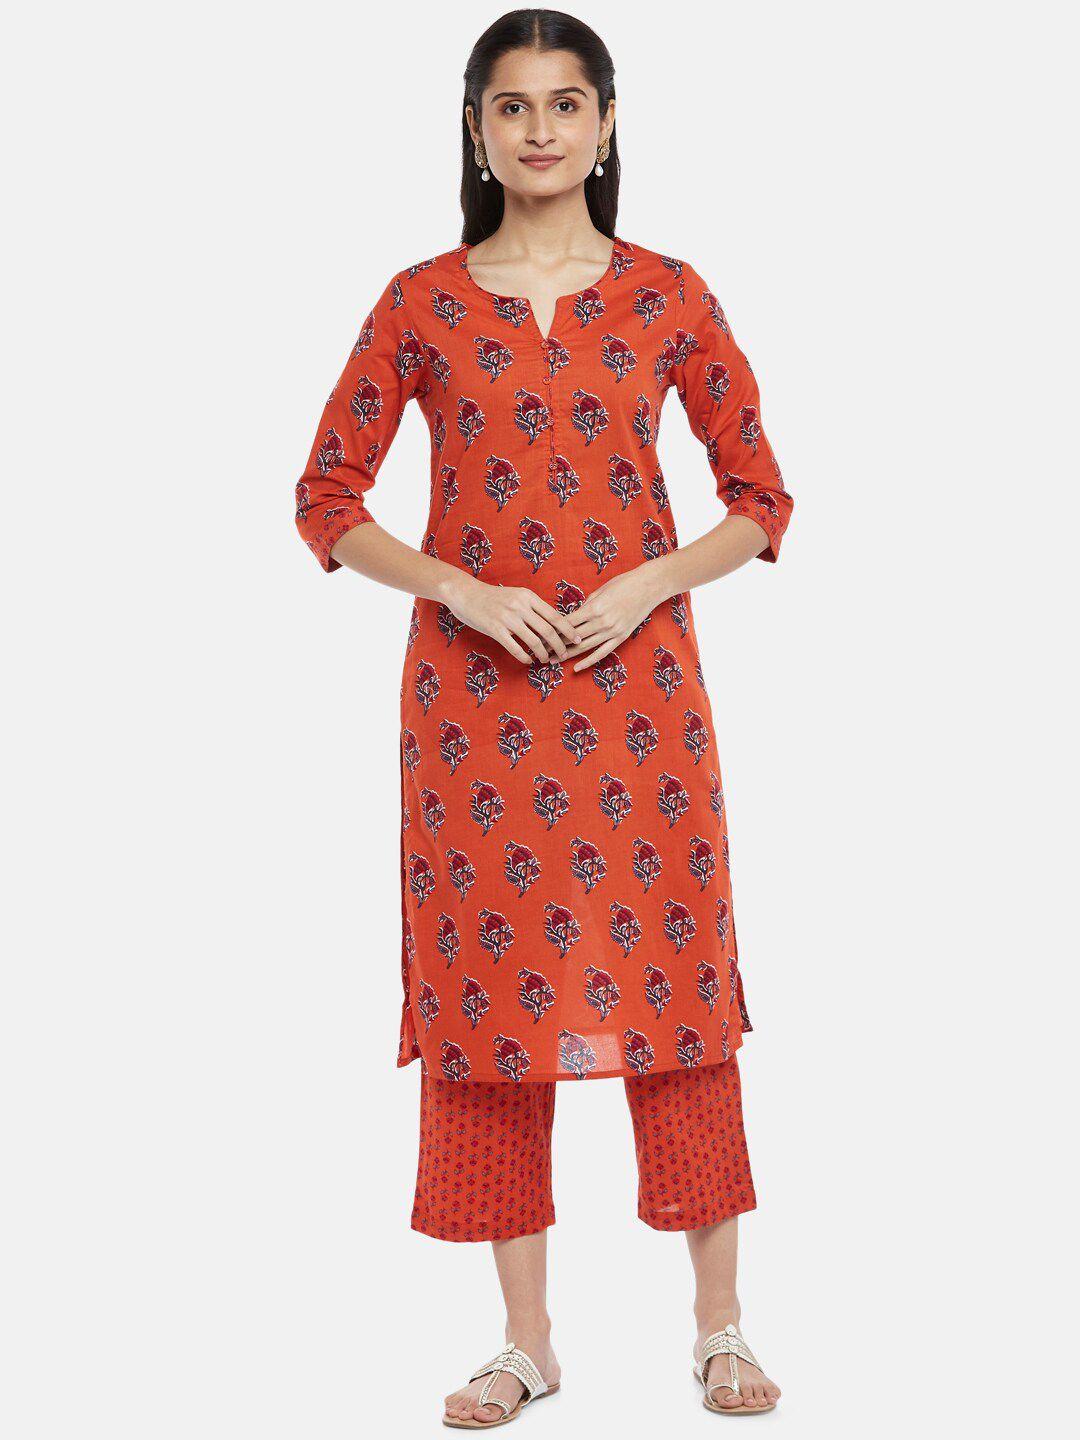 rangmanch by pantaloons women coral printed pure cotton kurta with trousers